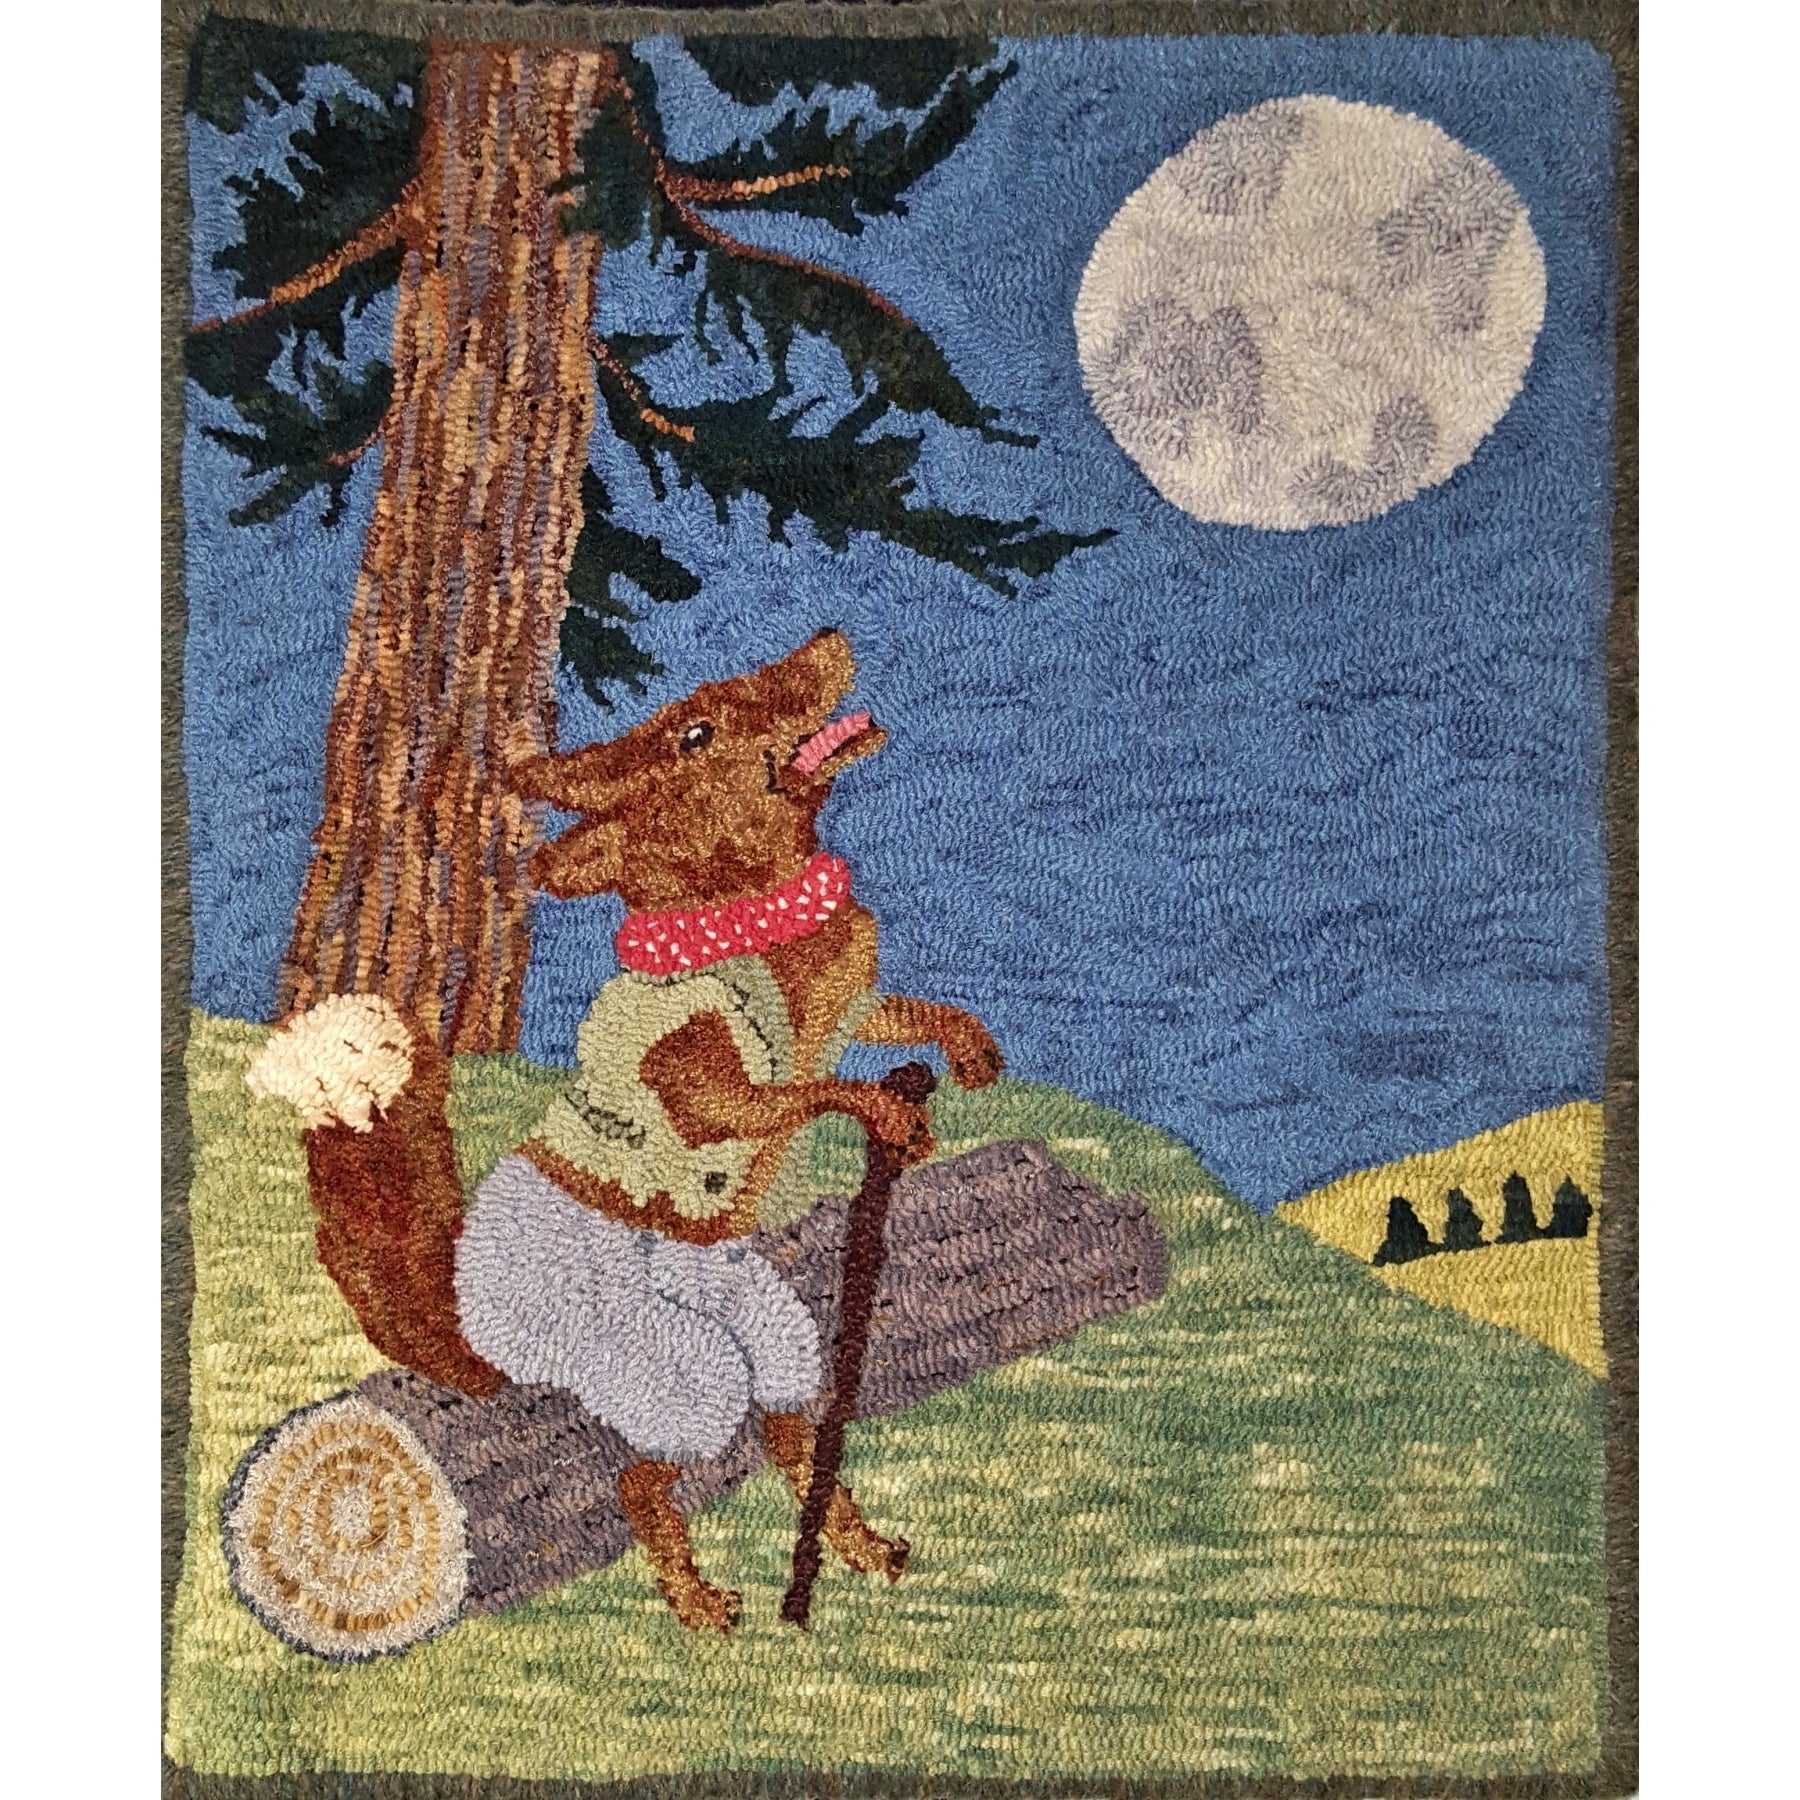 Reddy Fox, rug hooked by Gretchen Gray